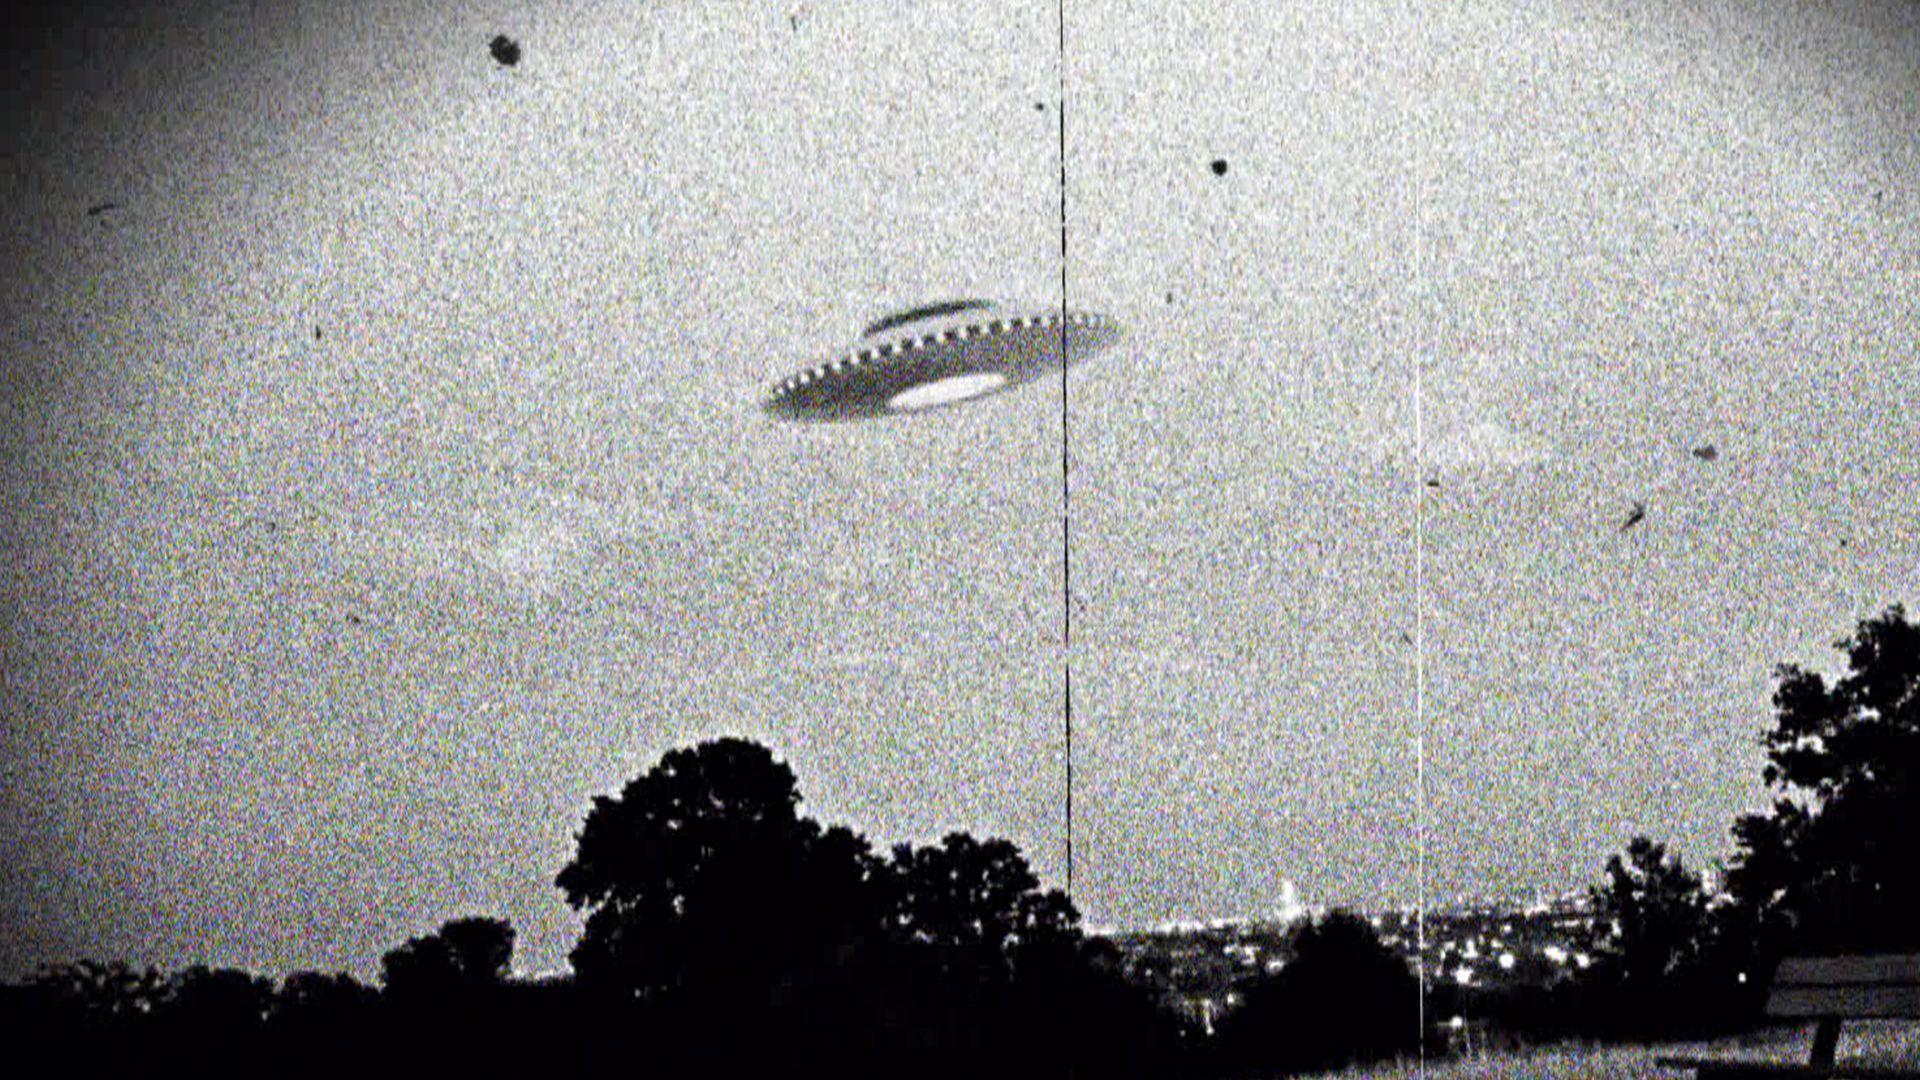 UFO Fascination Says More About Humans Than About Aliens